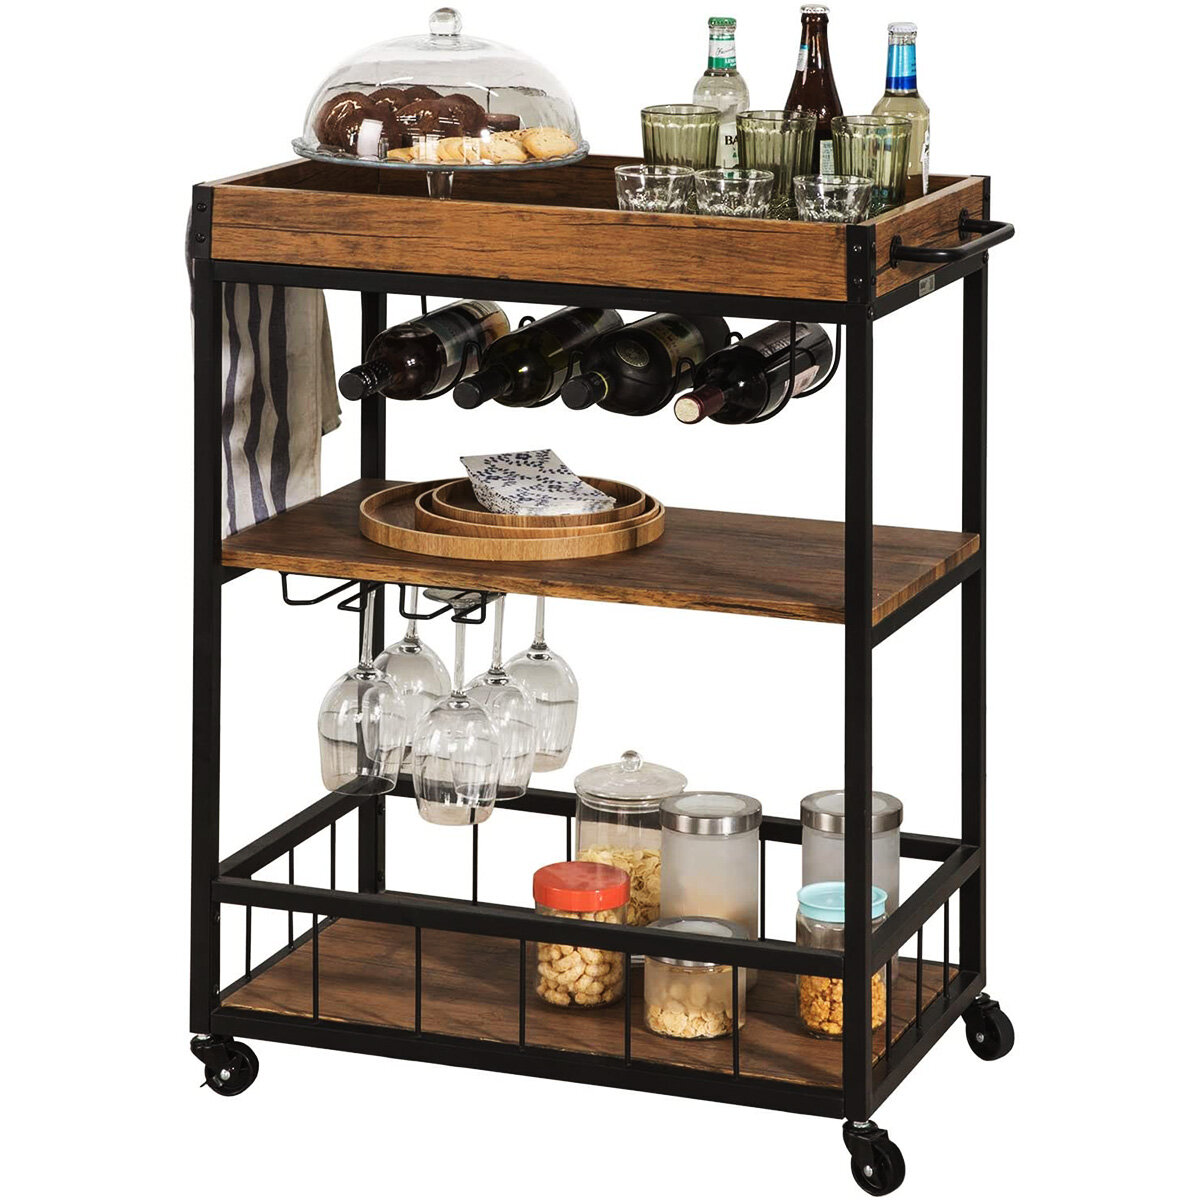 Image of Dinaza 3-Tier Bar Carts Kitchen Serving Utility Cart on Wheels with Storage for Outdoor Kitchen Club Living RoomWood F